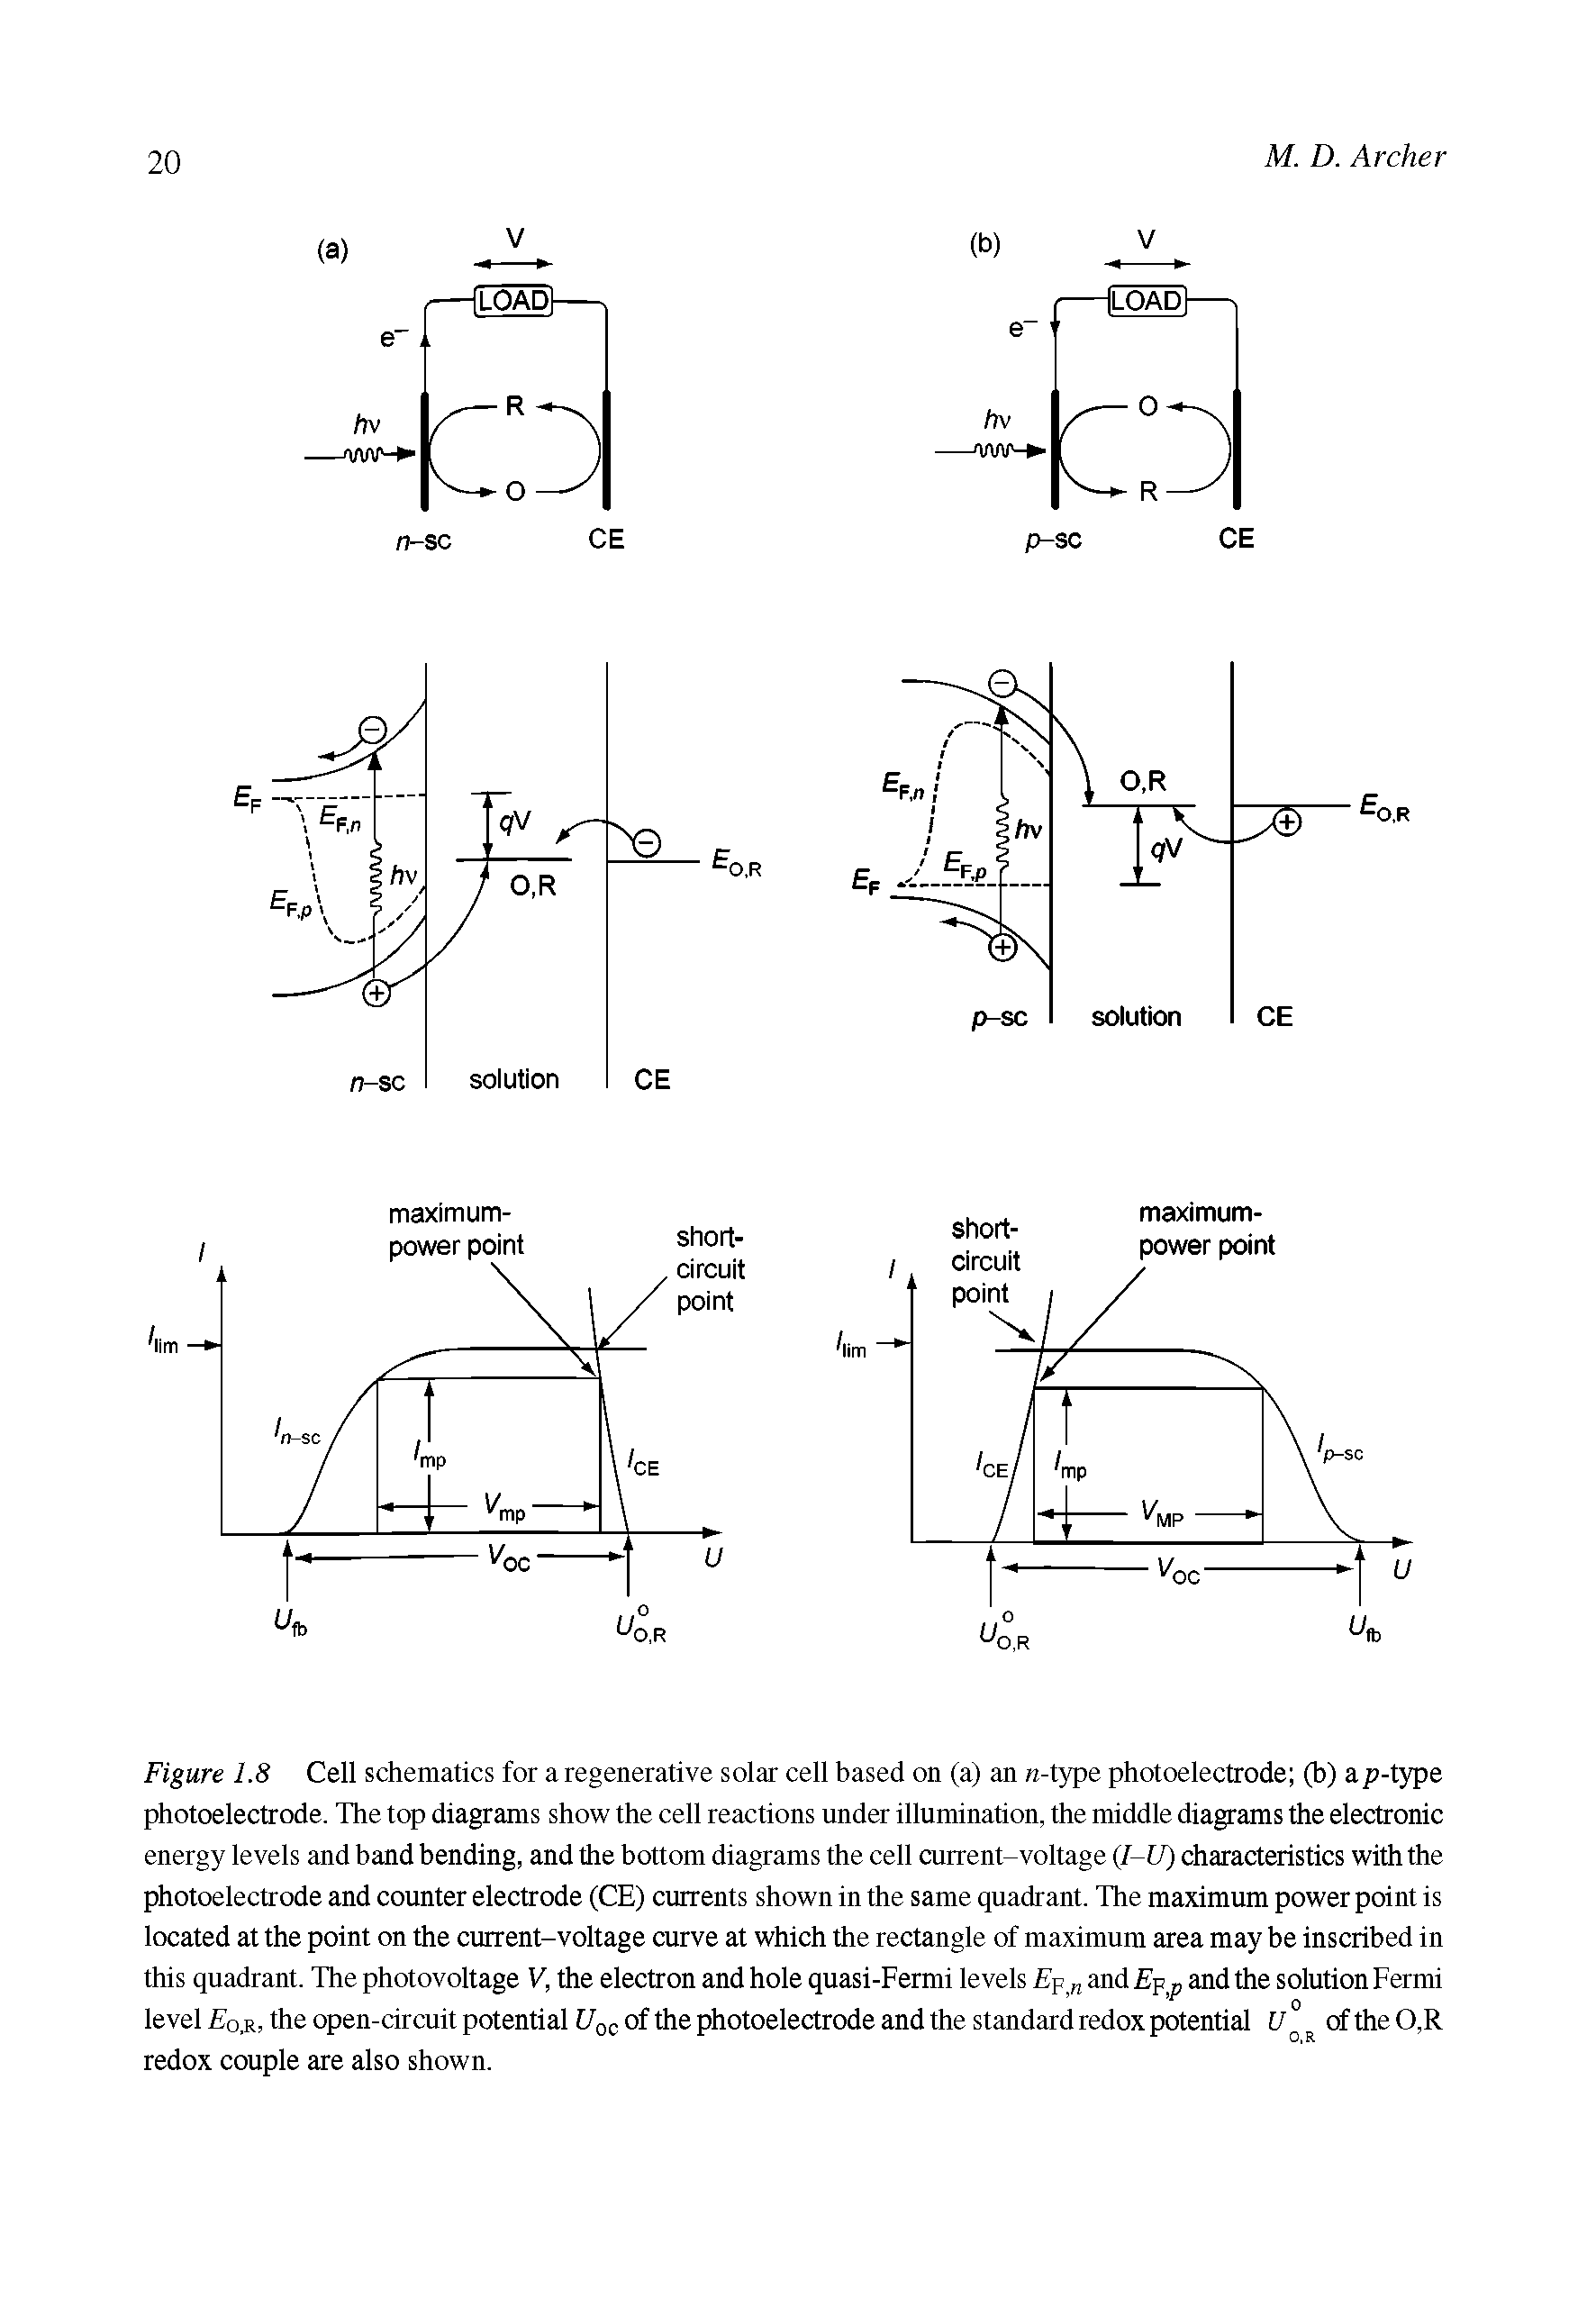 Figure 1.8 Cell schematics for a regenerative solar cell based on (a) an n-type photoelectrode (b) ap-type photoelectrode. The top diagrams show the cell reactions under illumination, the middle diagrams the electronic energy levels and band bending, and the bottom diagrams the cell current-voltage (I-U) characteristics with the photoelectrode and counter electrode (CE) currents shown in the same quadrant. The maximum power point is located at the point on the current-voltage curve at which the rectangle of maximum area may be inscribed in this quadrant. The photovoltage V, the electron and hole quasi-Fermi levels E and fip and the solution Fermi level f o.R, the open-circuit potential Ugc of the photoelectrode and the standard redox potential 17 ° of the 0,R redox couple are also shown.